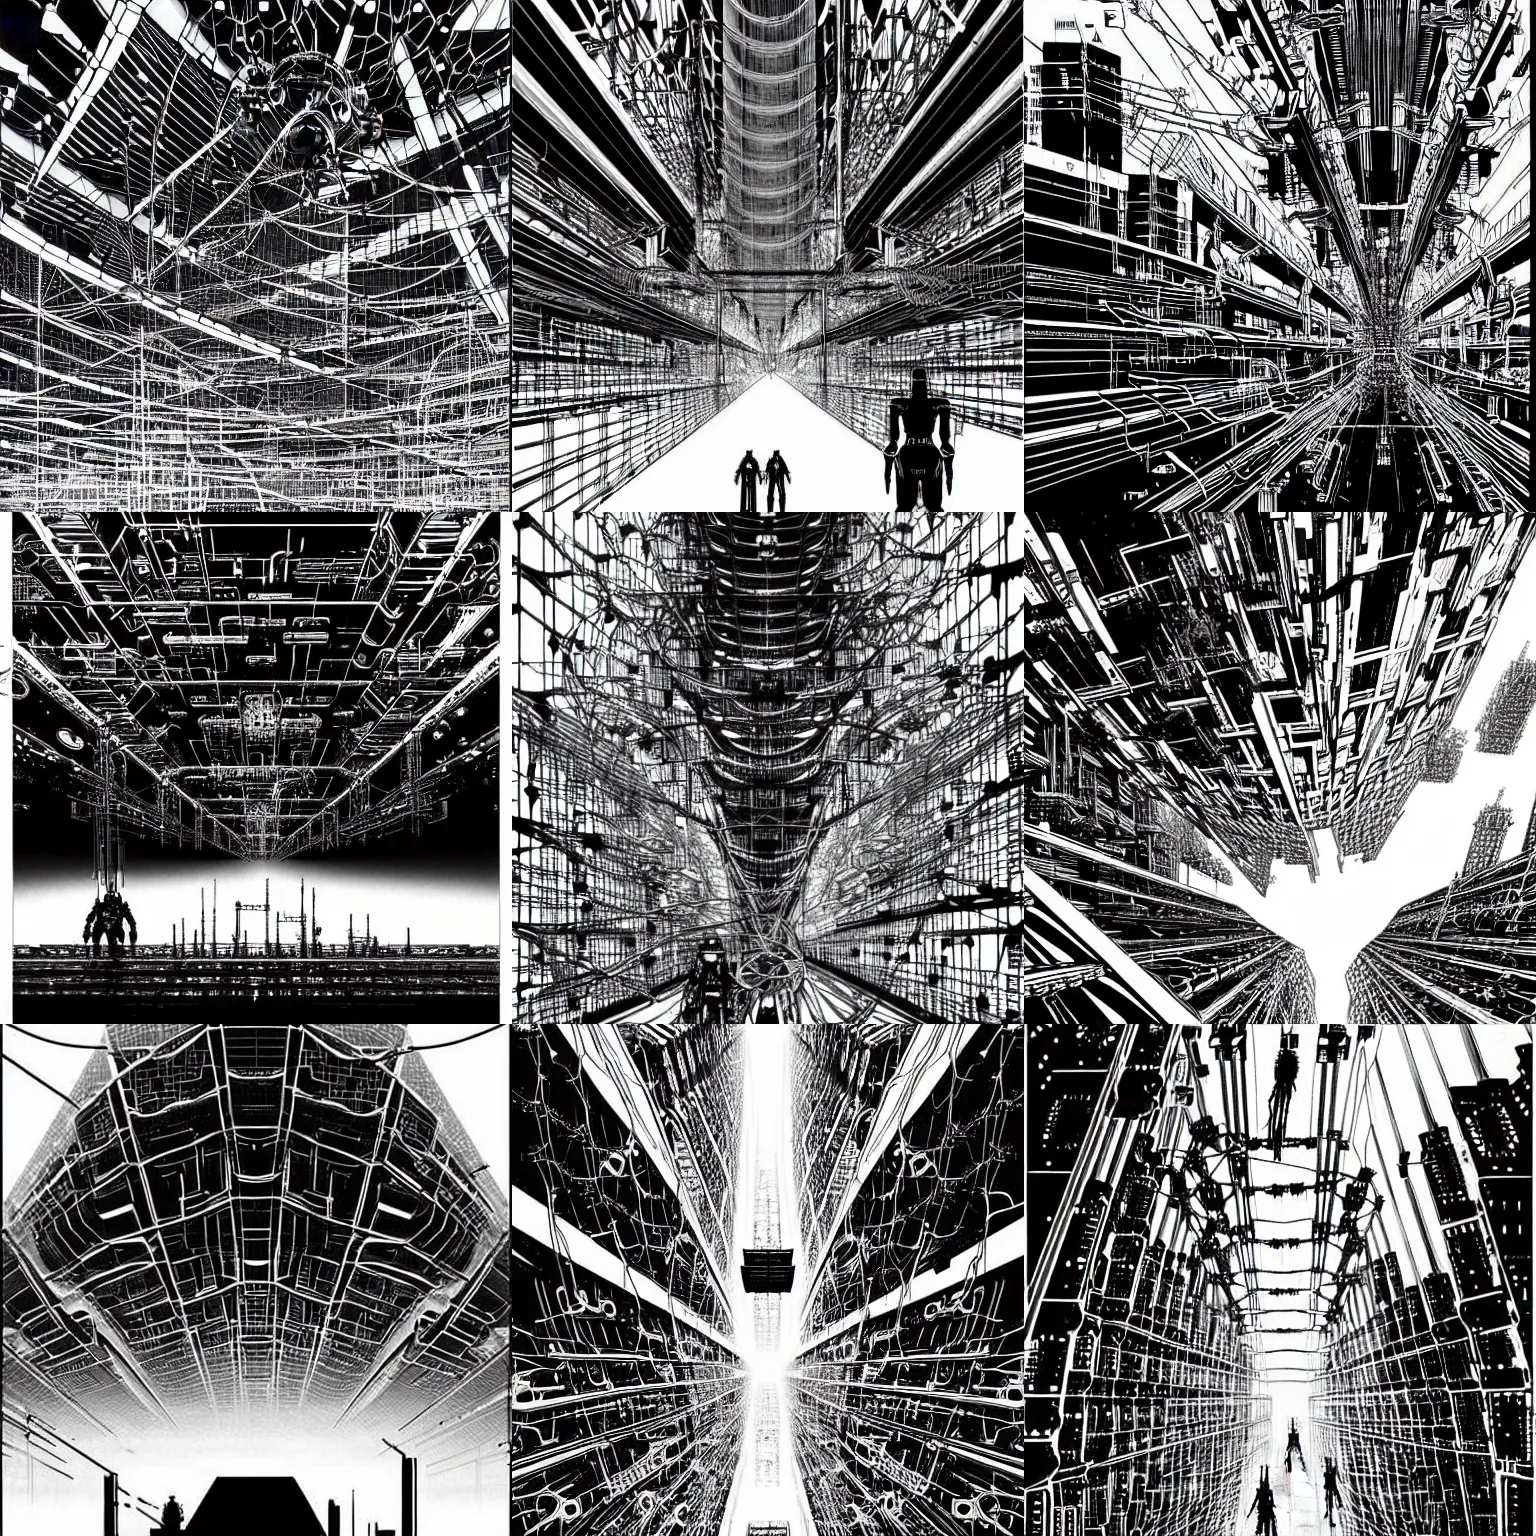 Prompt: giant dimantled disassembled cyborgs and biological androids with wires on bridges and pipes walk through a huge cybernetic megastructure multi - level metropolis in space, black and white, by nihei tsutomu